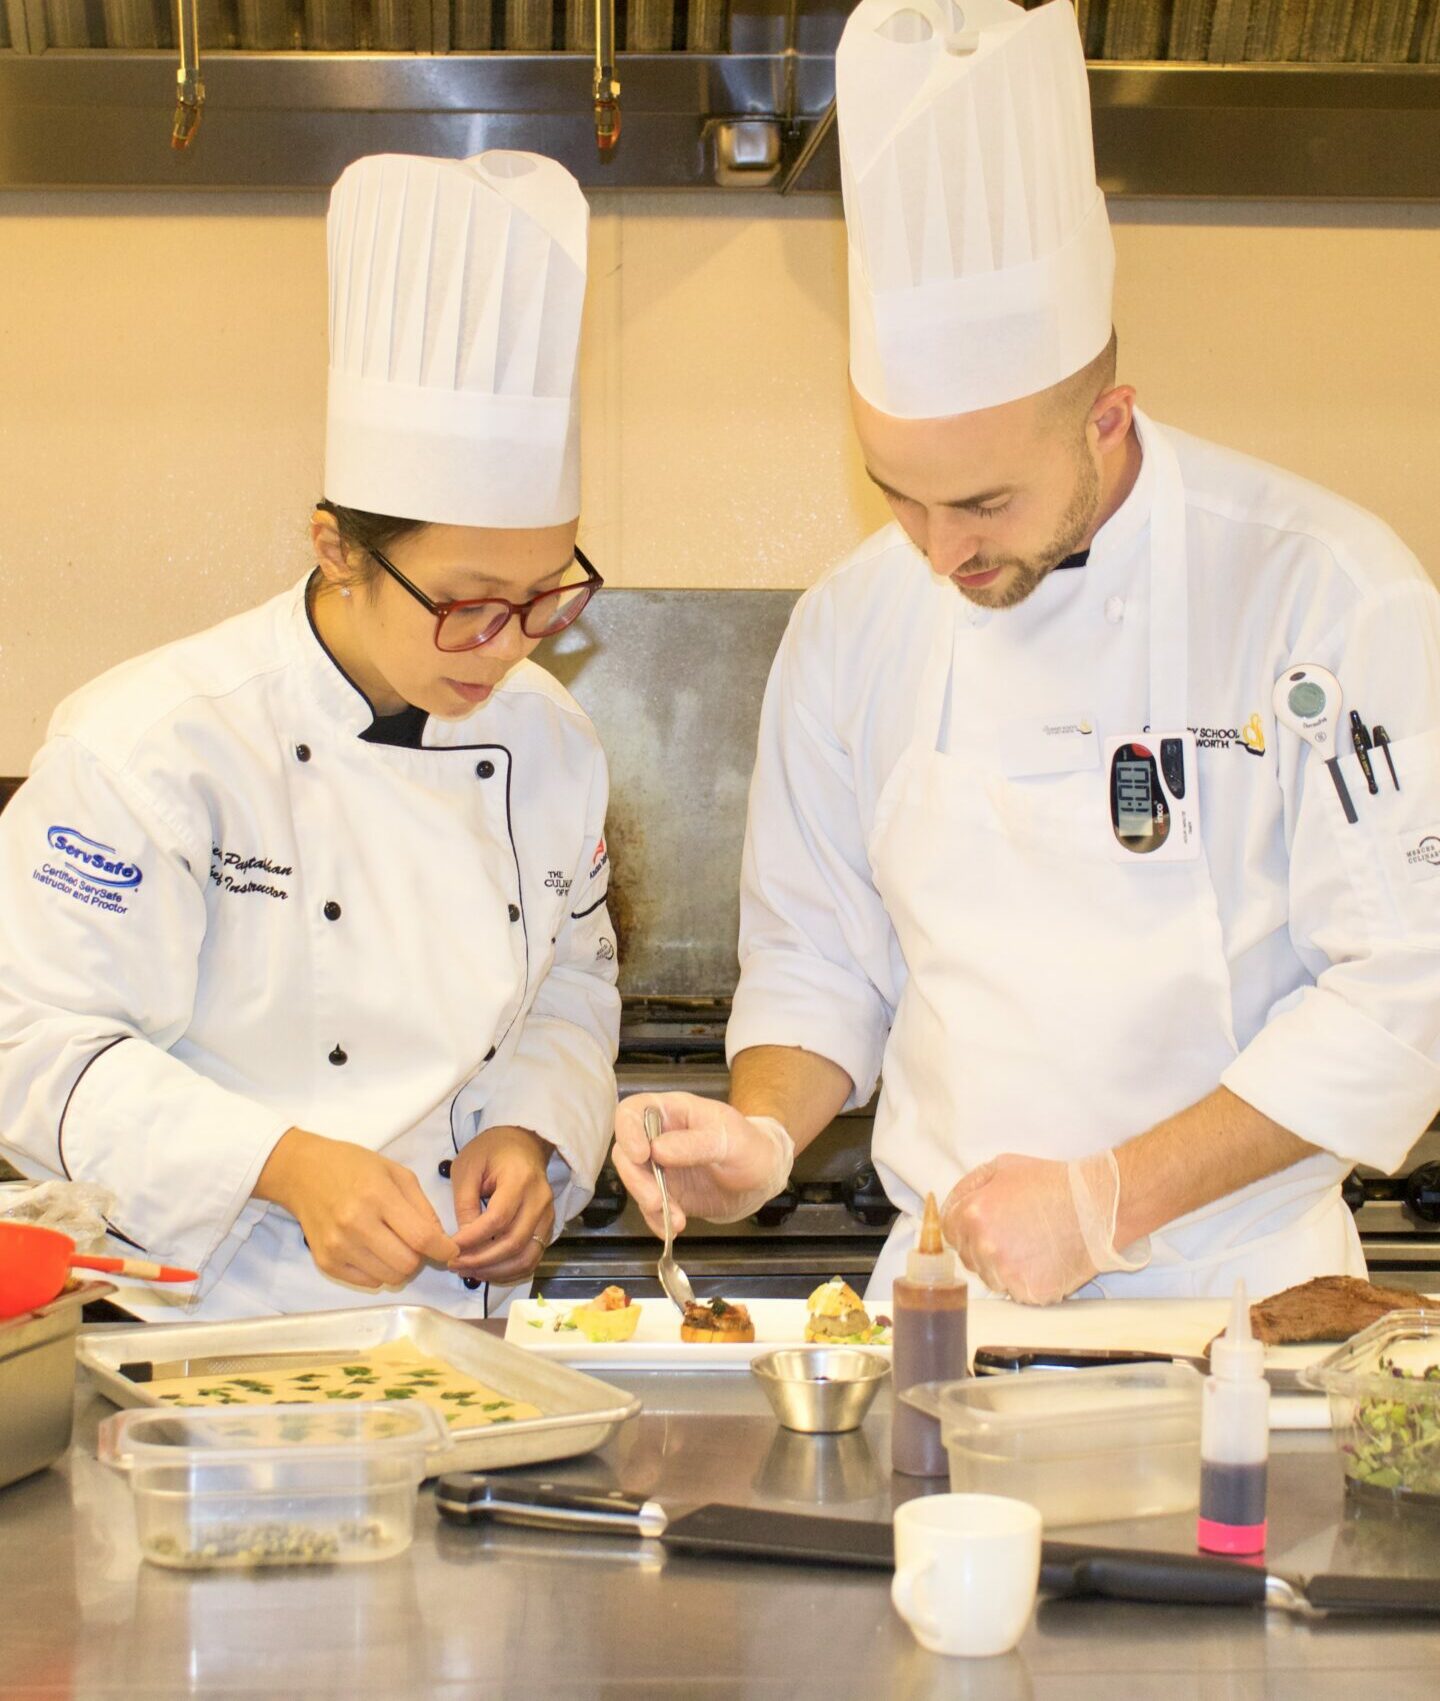 How to Become an Executive Chef